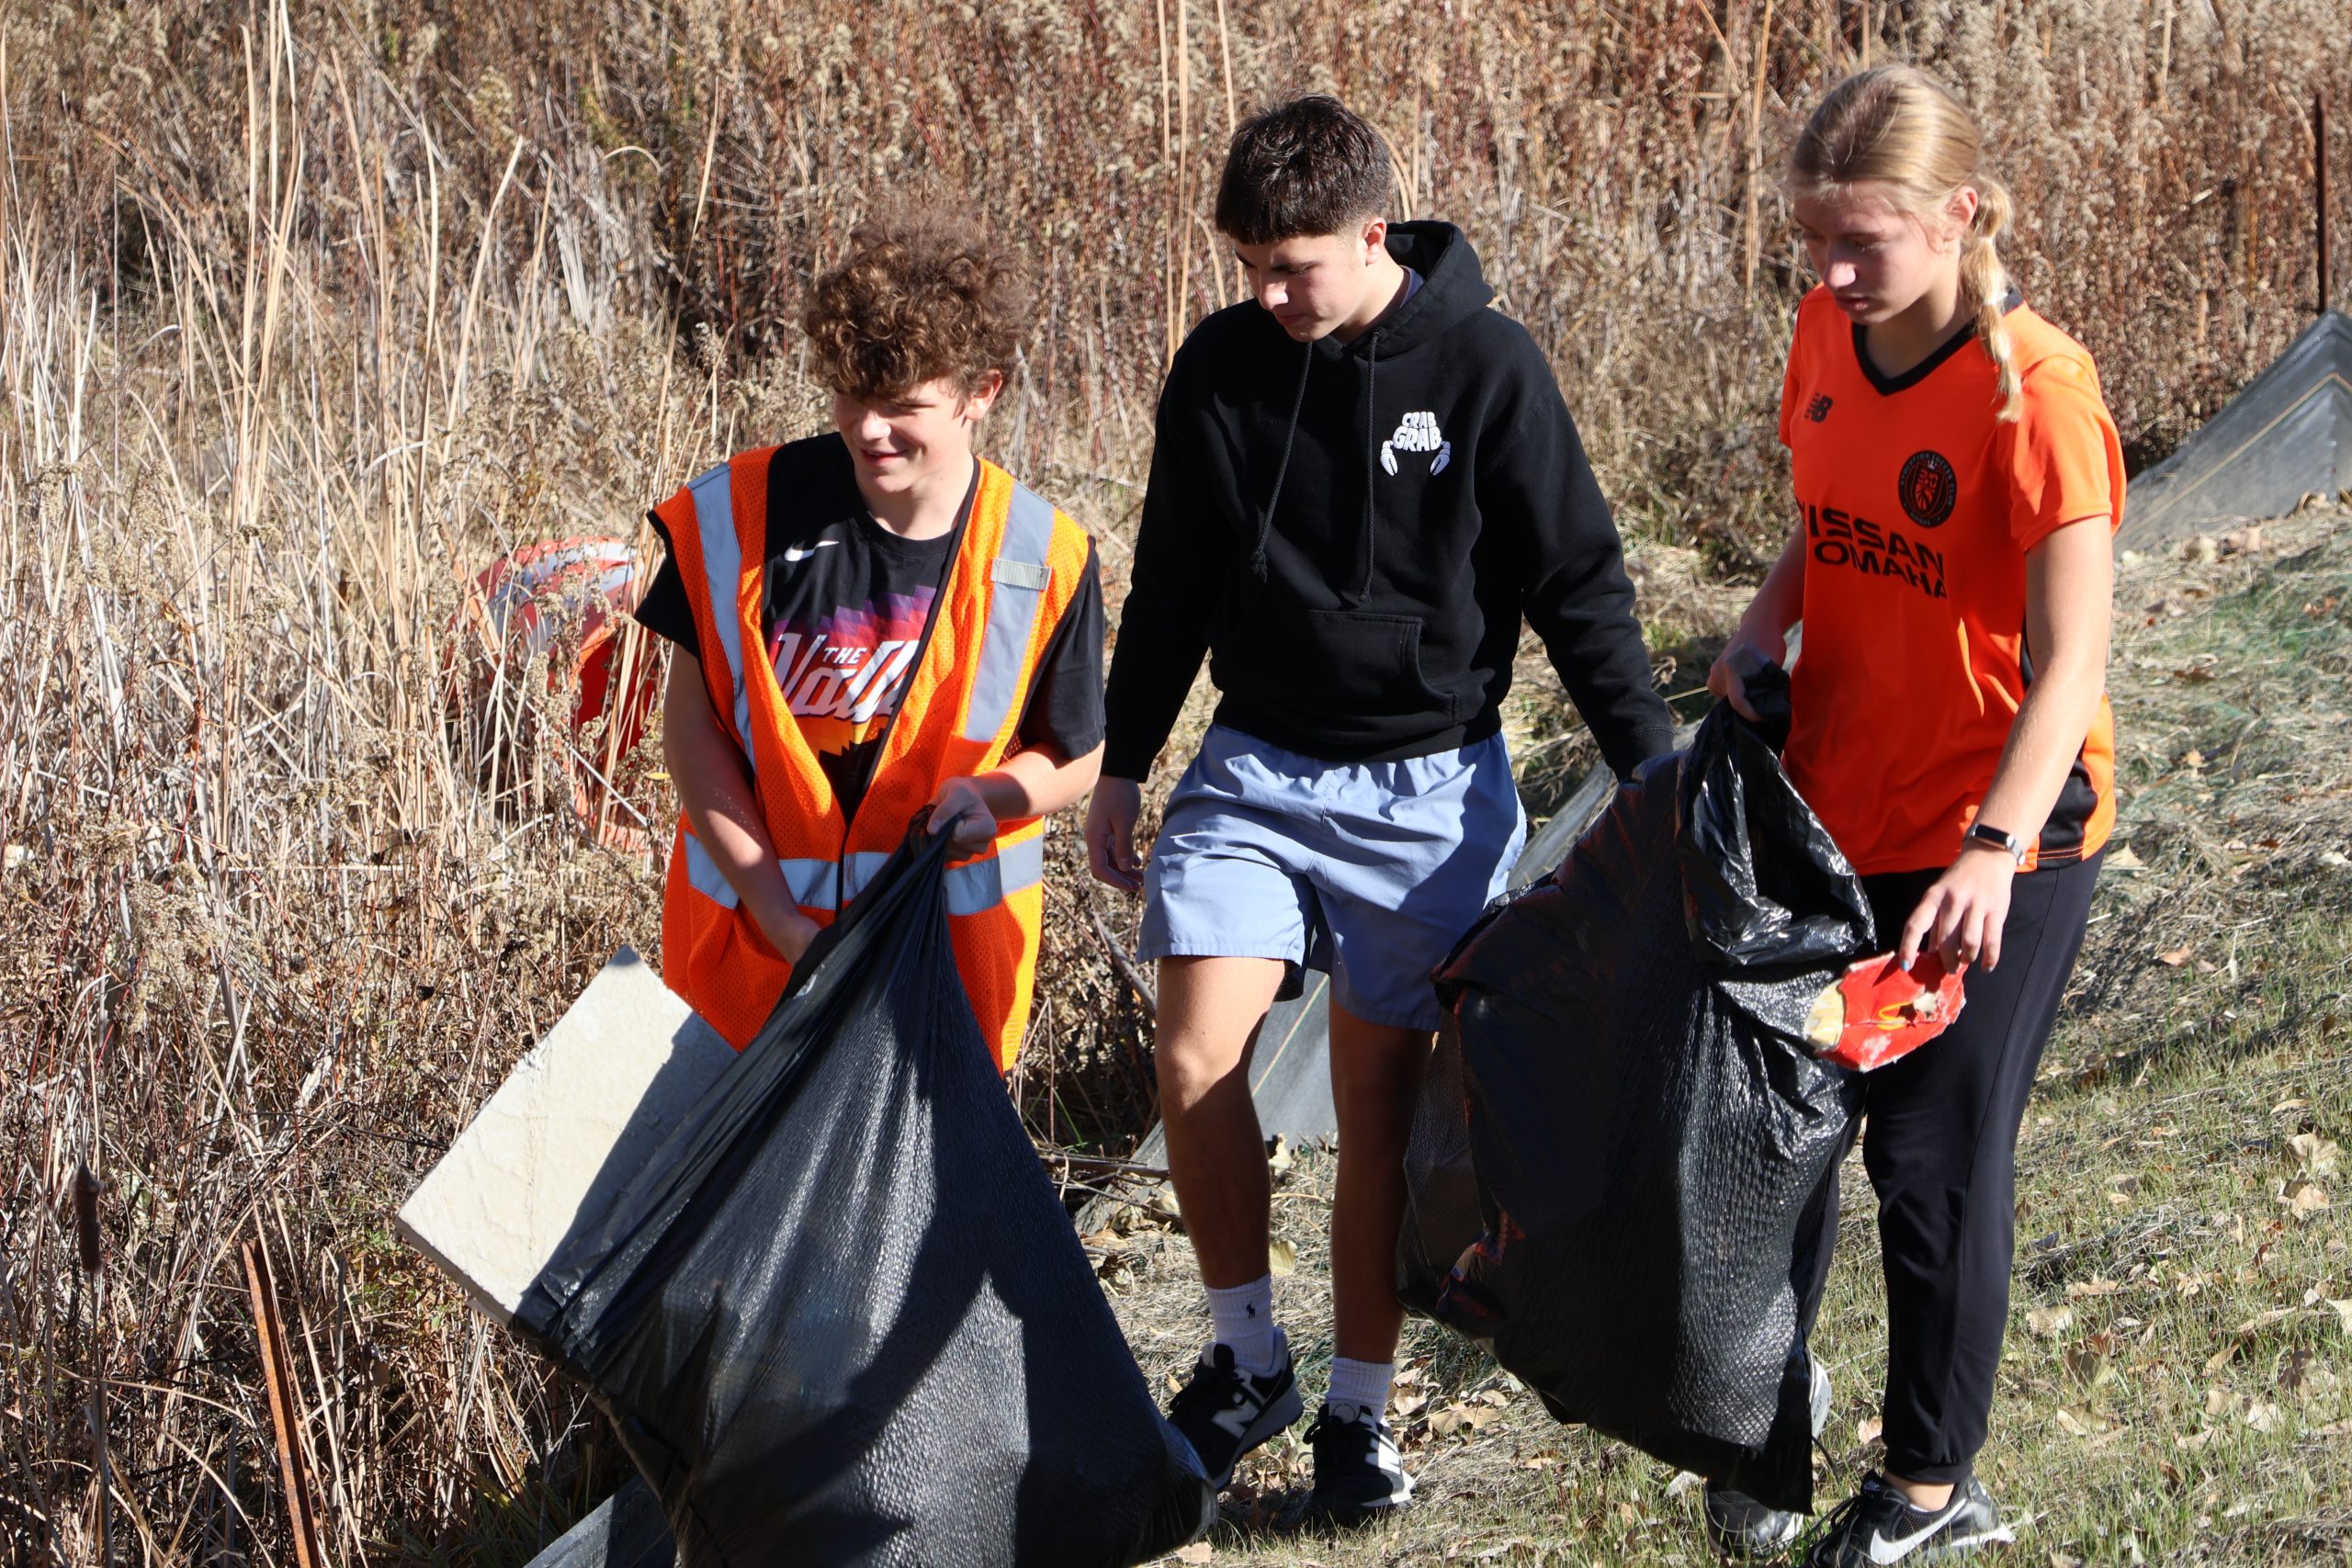 Alongside Highway 370,  FBLA members, Drew Vetter (11), Aiden Stoakes (11) and Camryn Reeson (11), work together to pick up litter.